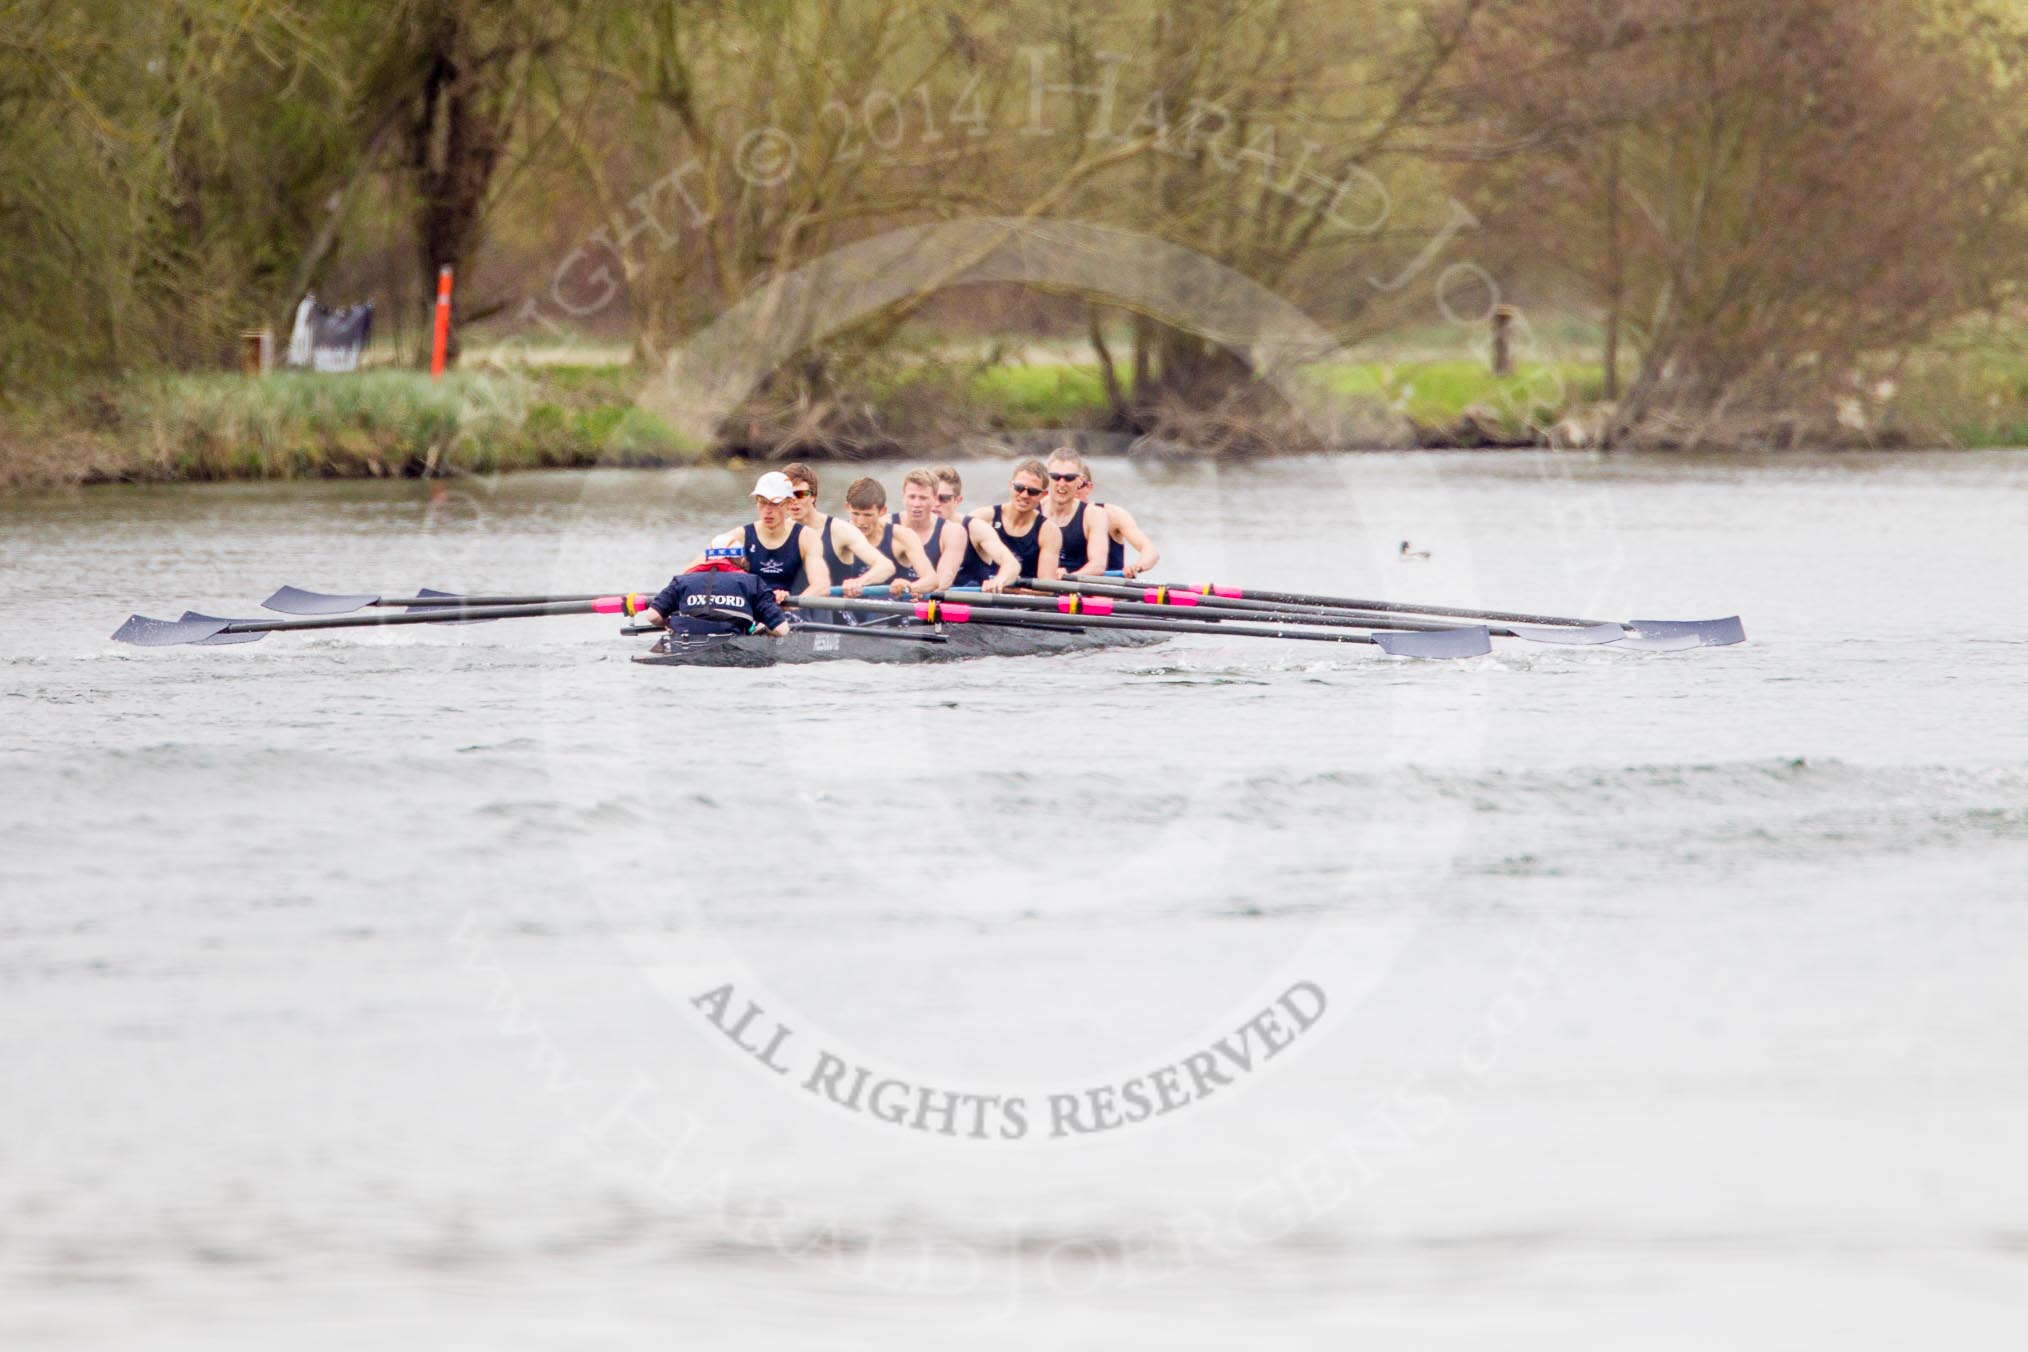 The Women's Boat Race and Henley Boat Races 2014: The Lightweight Men's Boat Race - OULRC vs CULRC. Oxford boat is reducing the distance to the leading Cambridge boat..
River Thames,
Henley-on-Thames,
Buckinghamshire,
United Kingdom,
on 30 March 2014 at 15:41, image #399